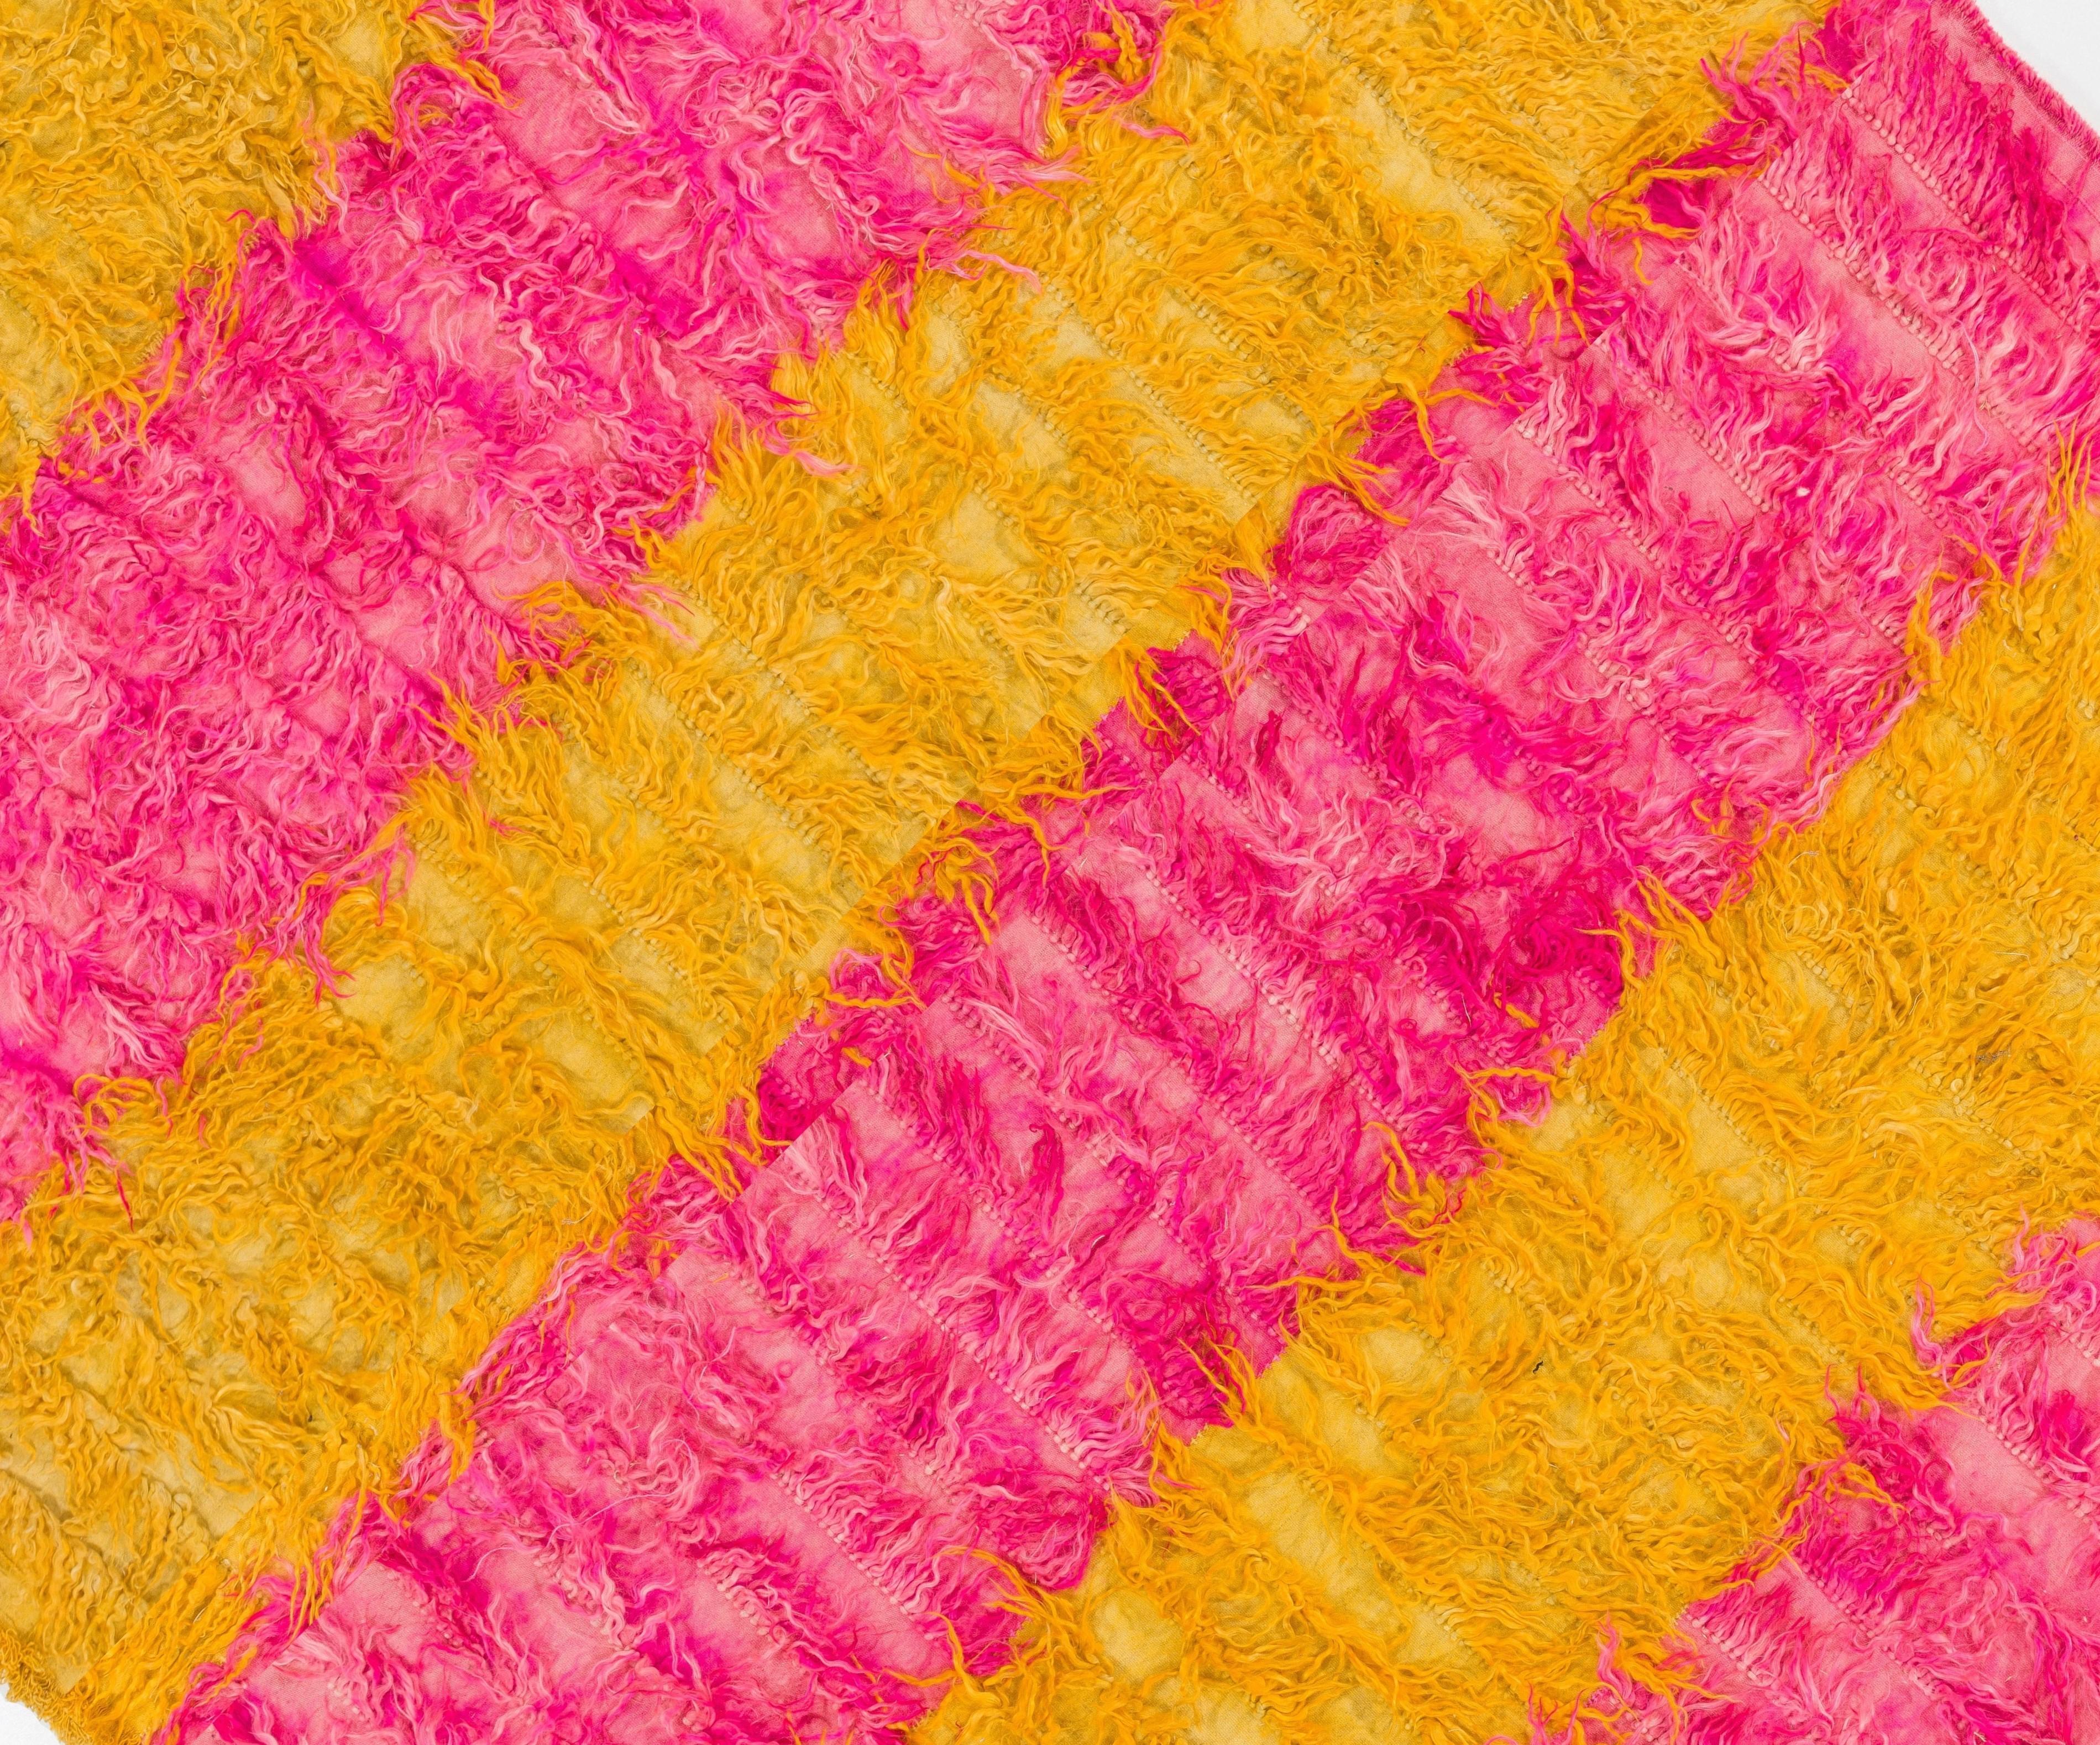 Turkish 8x10 Ft Vintage Pink & Yellow Shag Pile Rug, 100% Wool. Custom Options Available For Sale